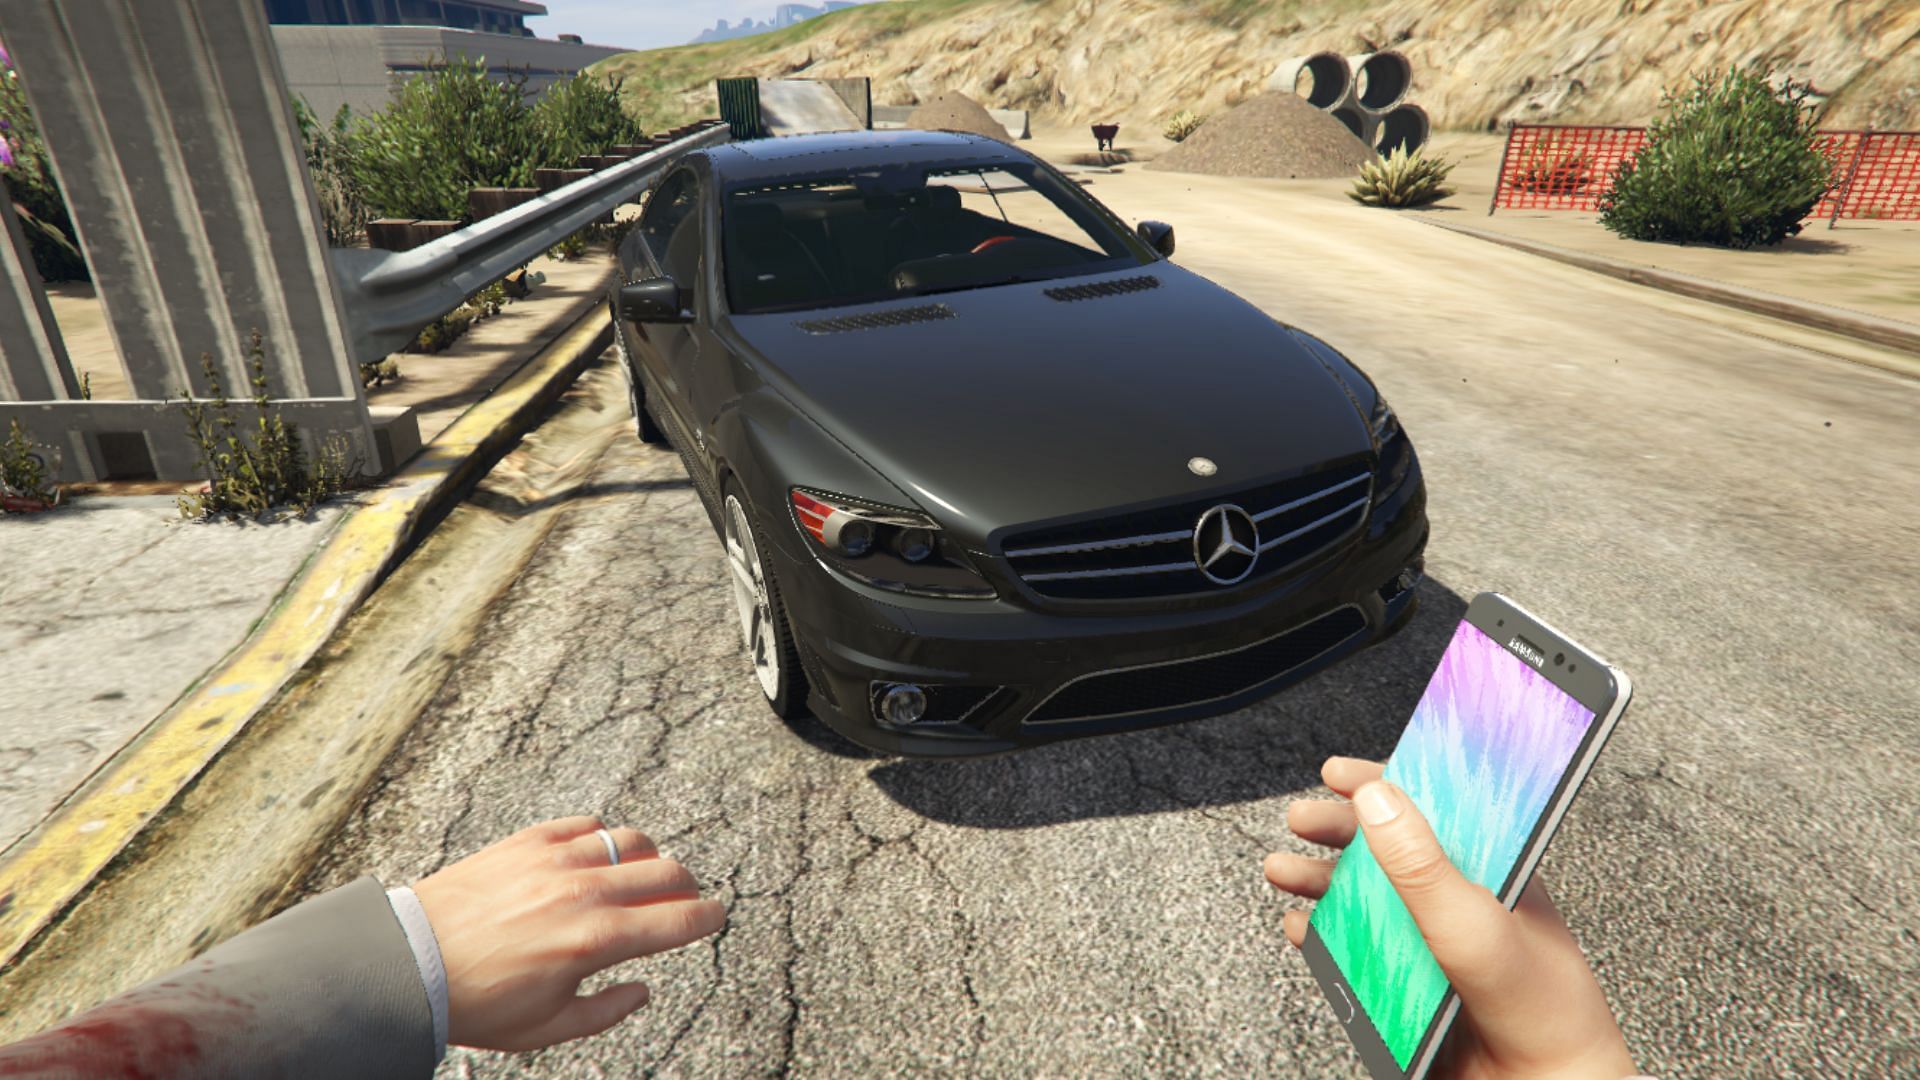 A demonstration of the Samsung Galaxy Note 7 Bomb in Grand Theft Auto 5 (Image via HitmanNiko)